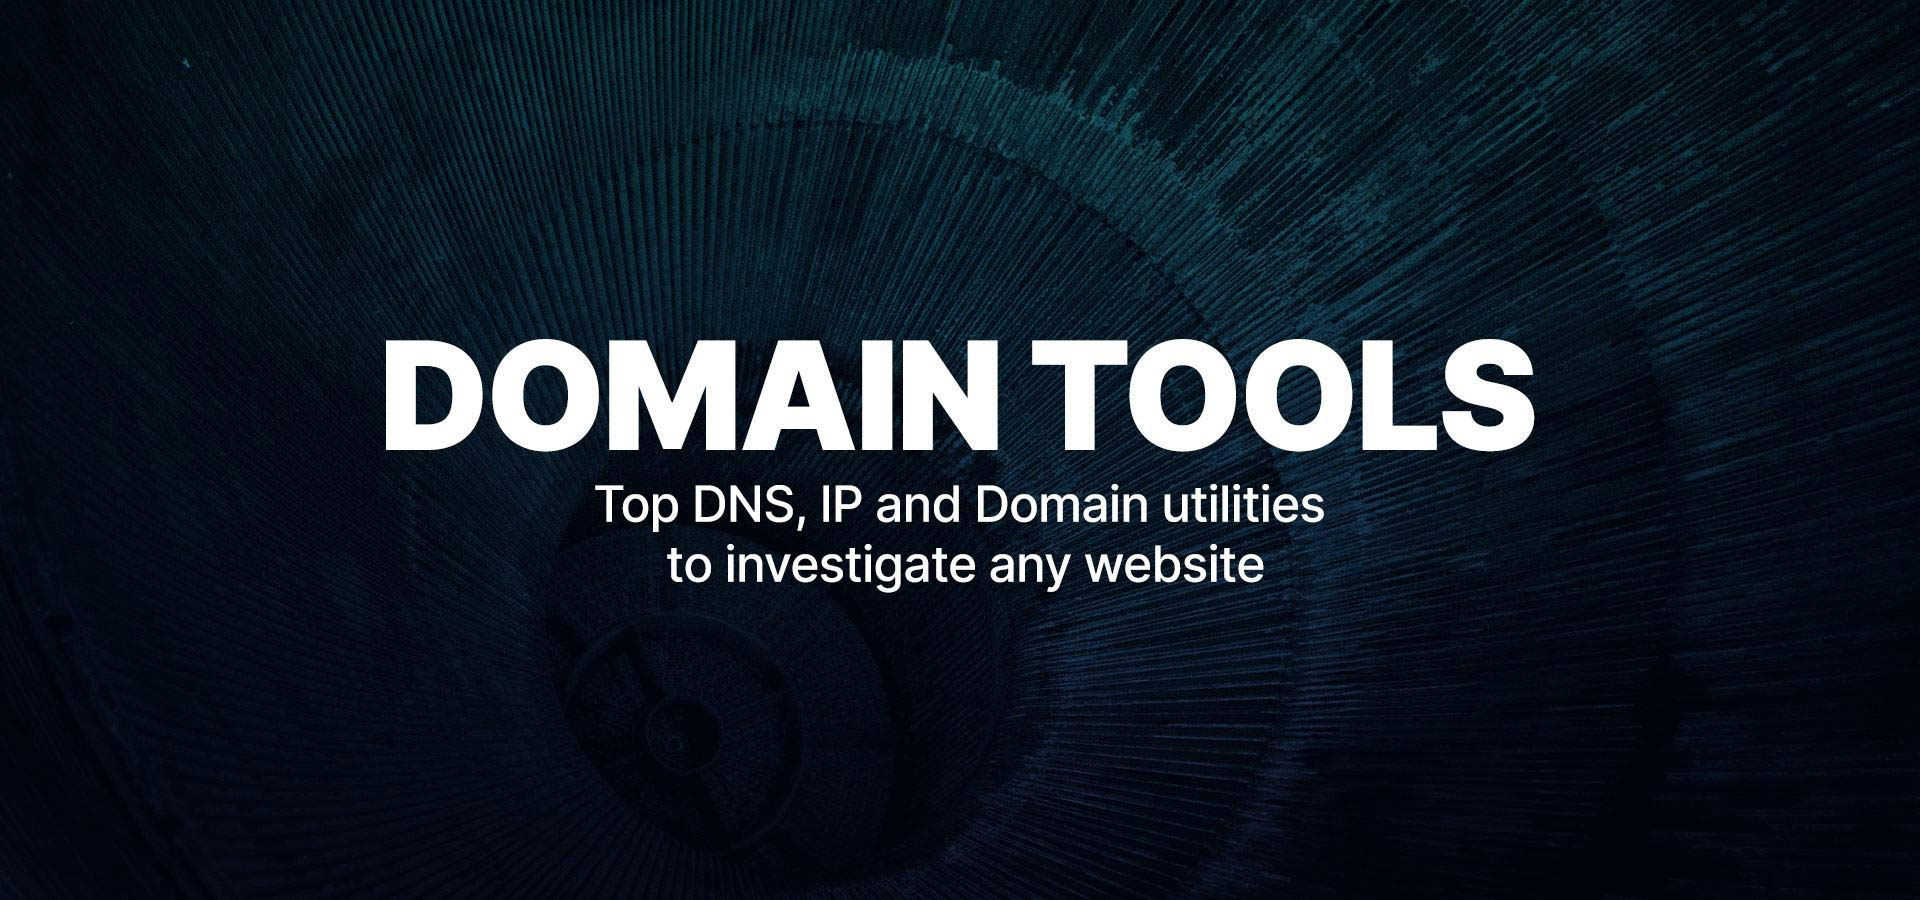 WHOIS Search, Access a domain's WHOIS record, Domain Research Suite, Search & Monitor Tools